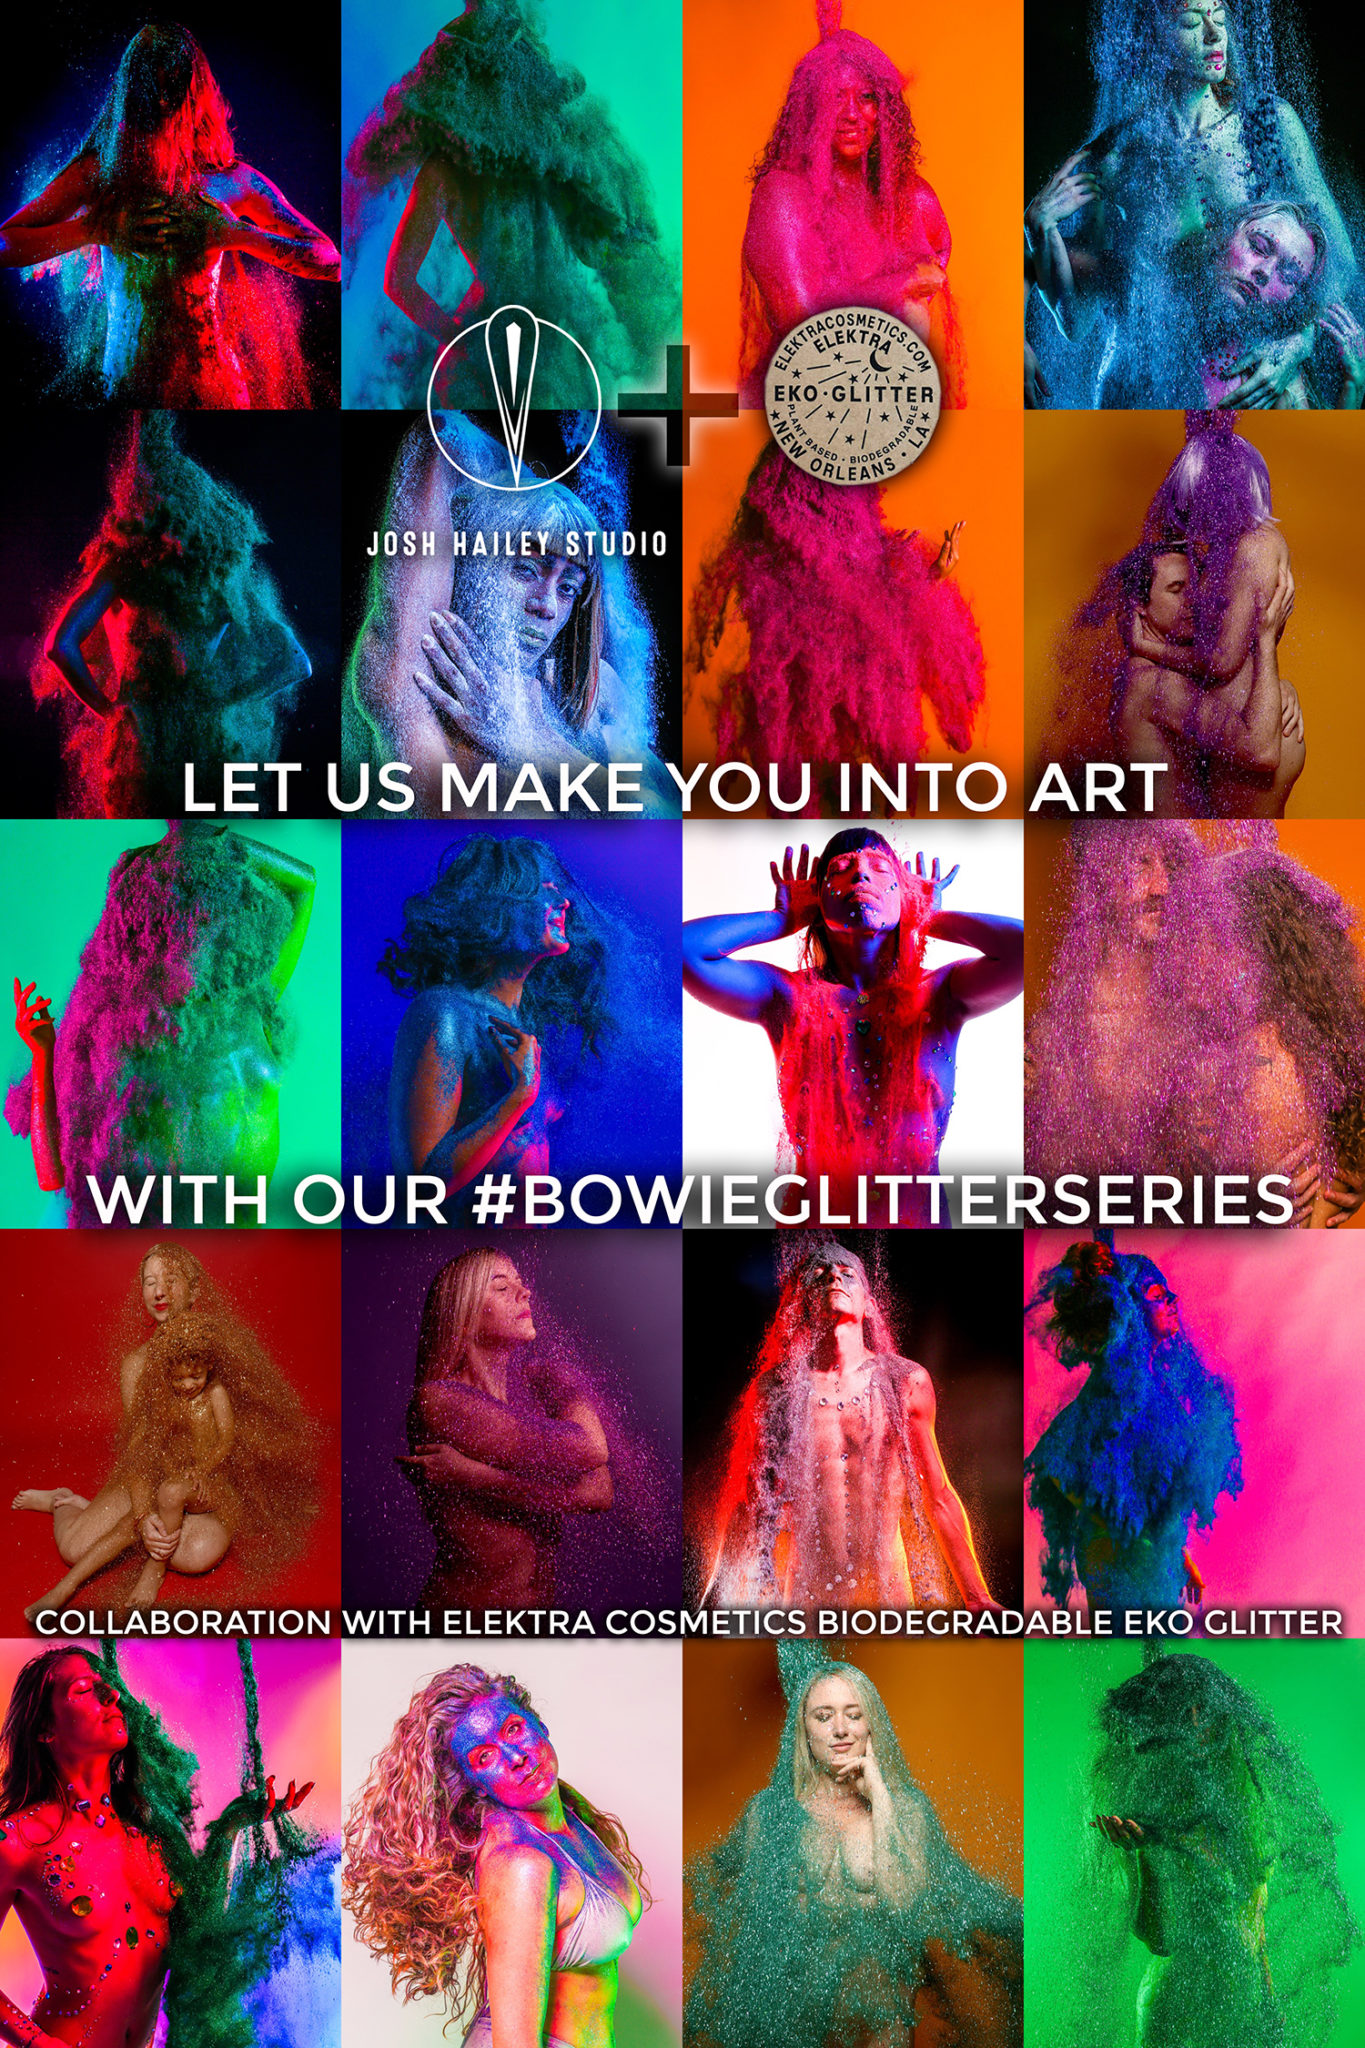 Bowie Glitter Series Photoshoot by Josh Hailey in Collaboration with Elektra Cosmetics Eko Glitter Poster